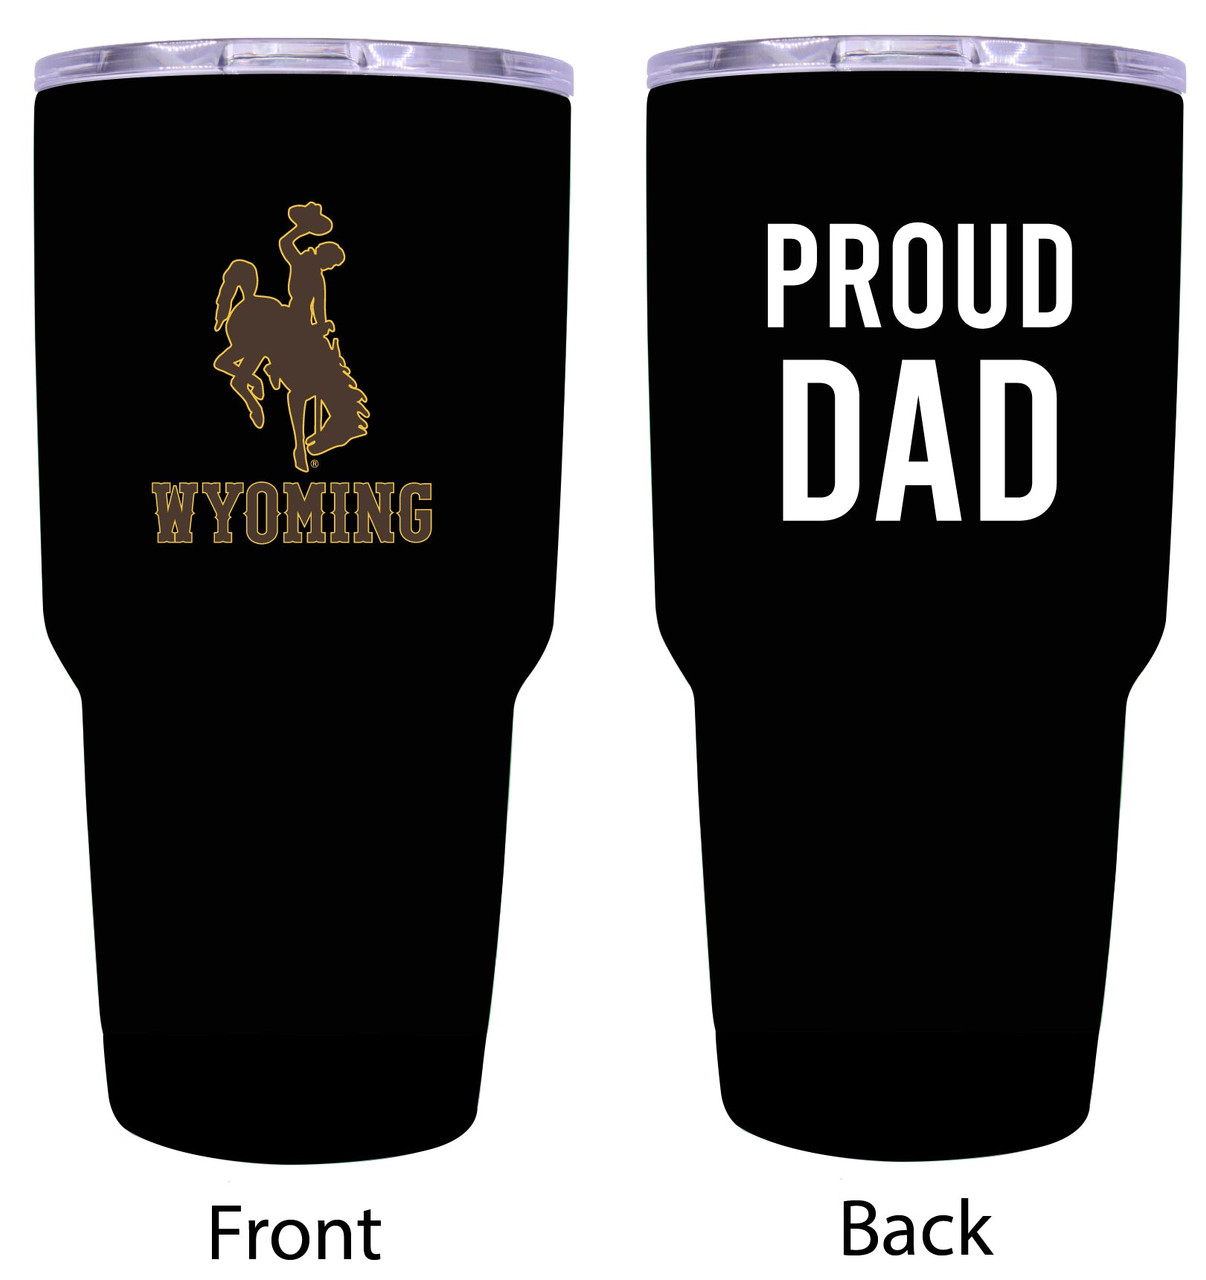 University of Wyoming Proud Dad 24 oz Insulated Stainless Steel Tumblers Choose Your Color.